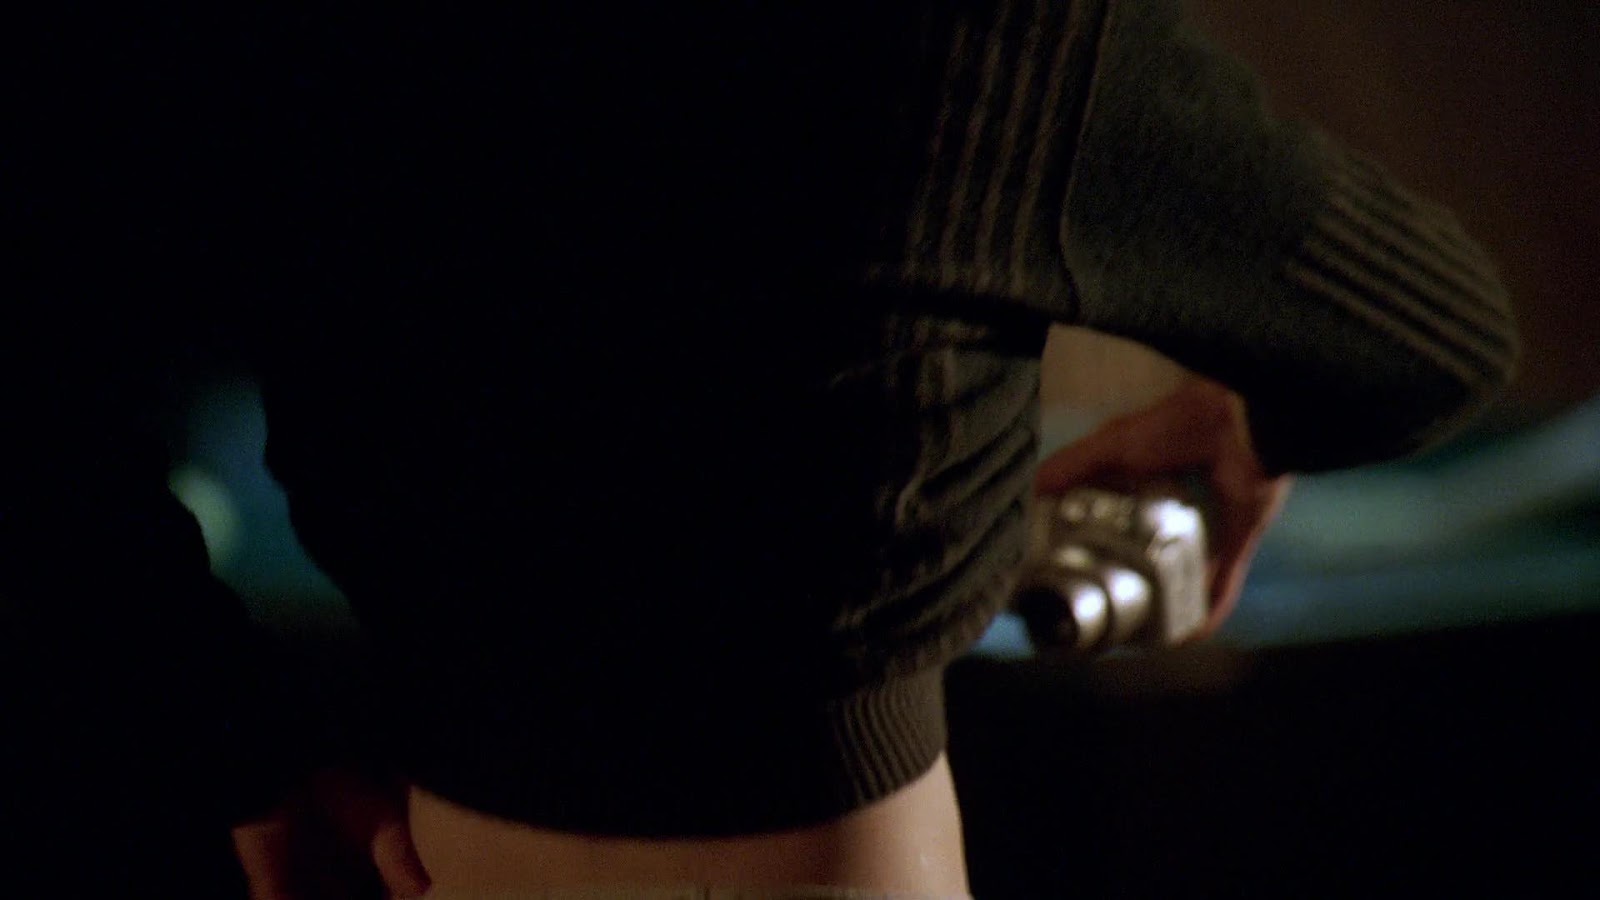 Wire nudity in the The Wire